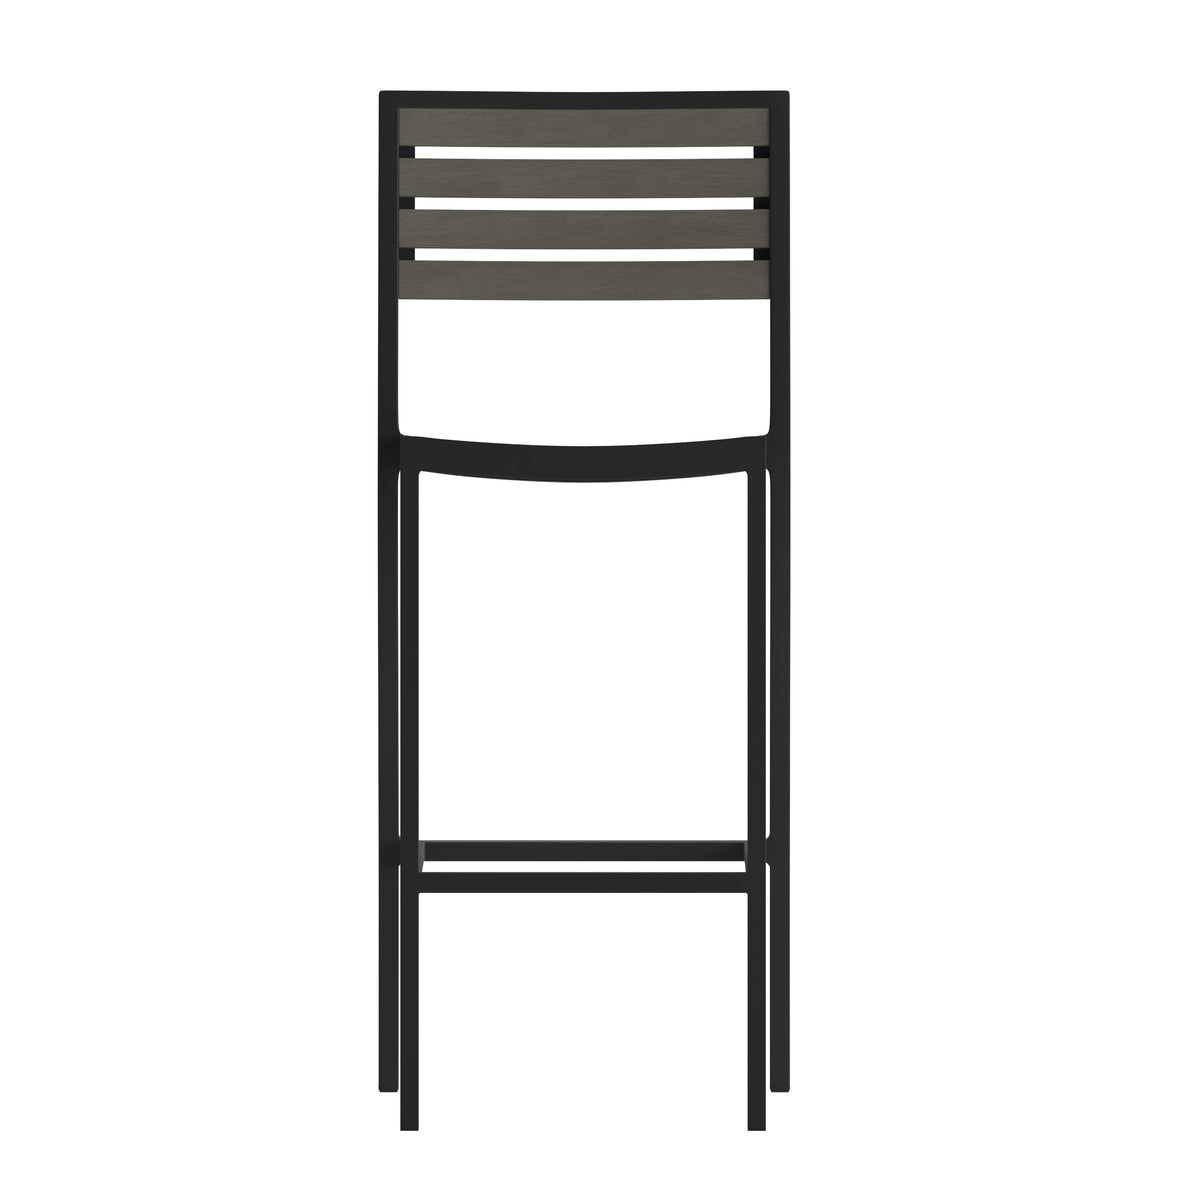 Gray Wash |#| Commercial Grade Outdoor All-Weather Bar Stool with Poly Resin Slats - Gray Wash